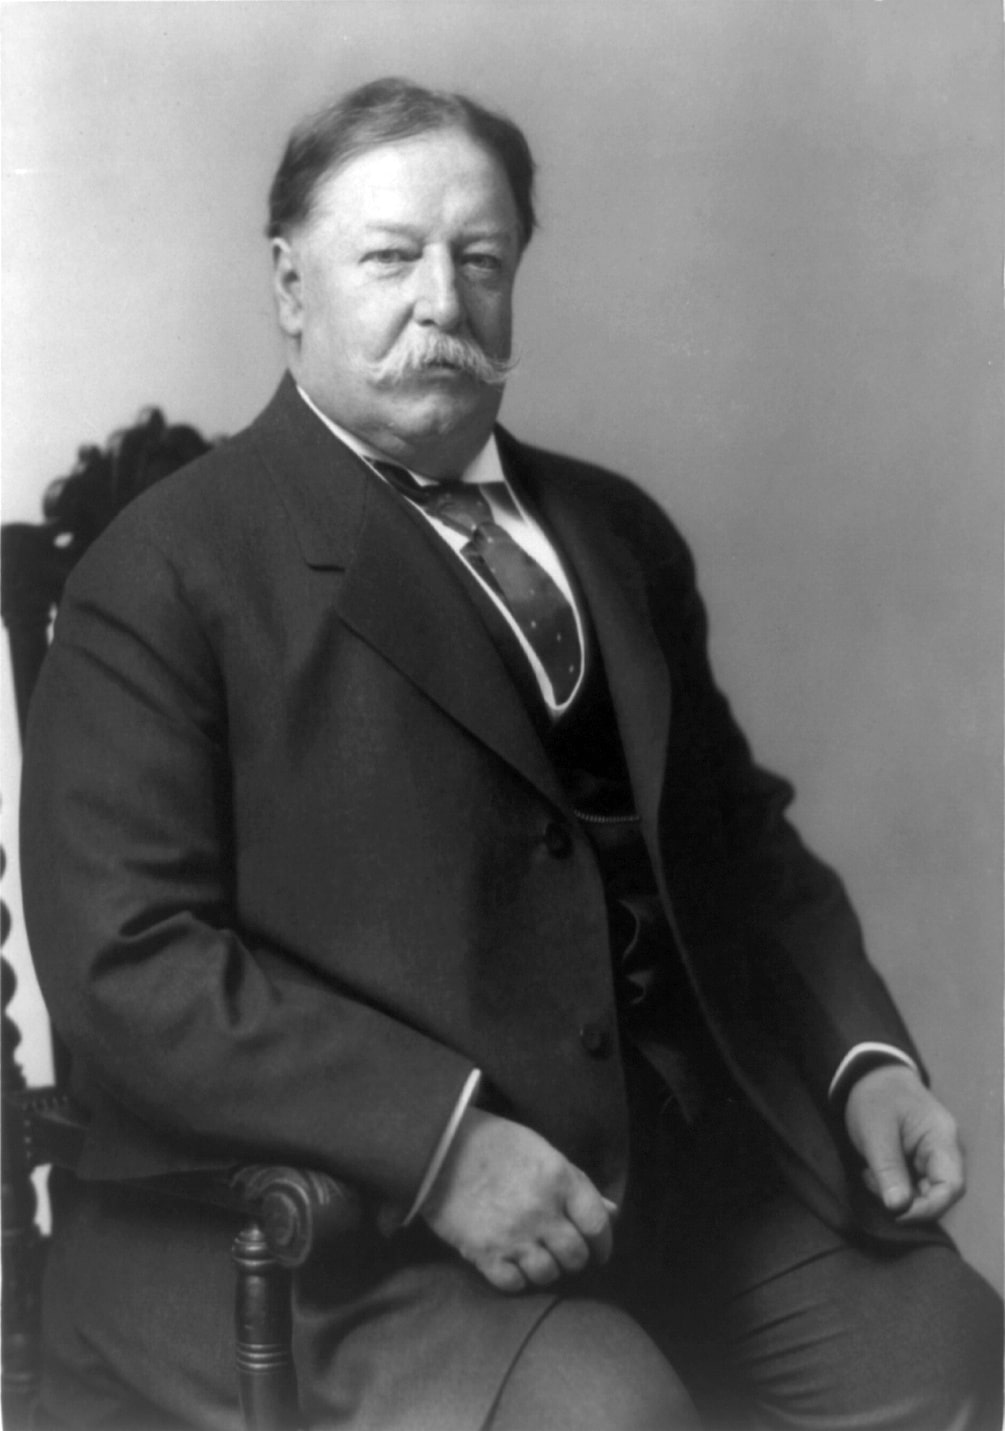 President William Taft Facts and Timeline